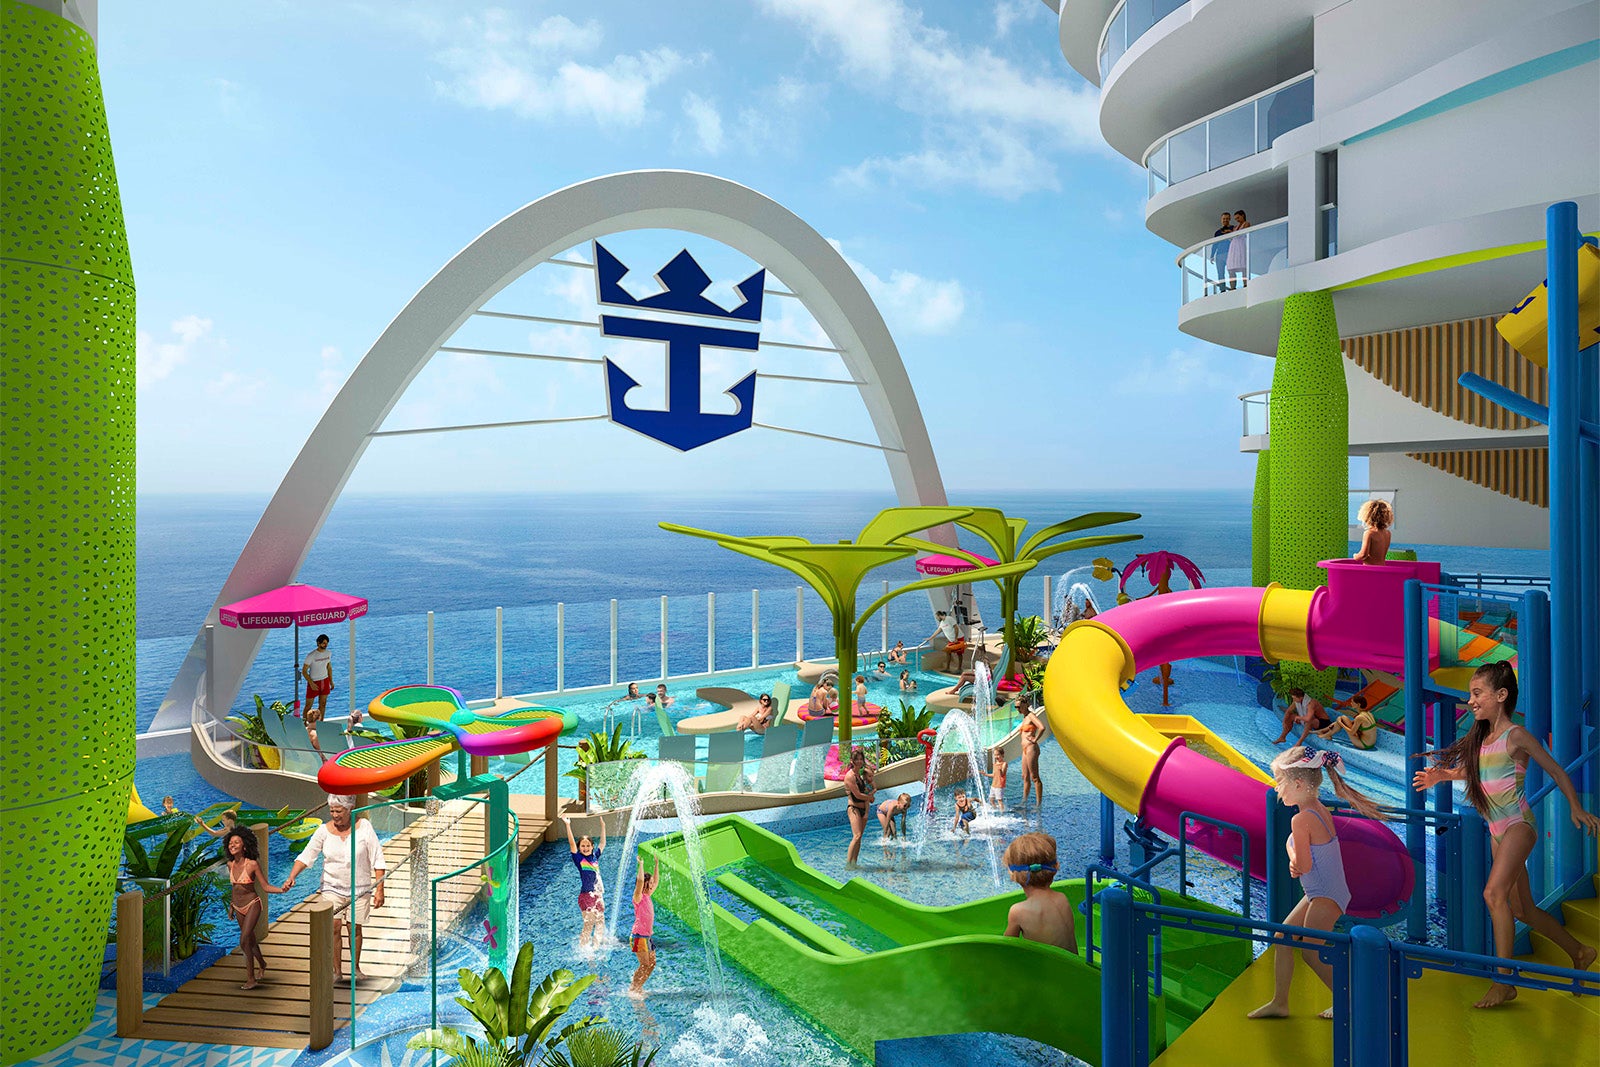 Royal Caribbean’s new cruise ship aims to be the ideal vacation for young families